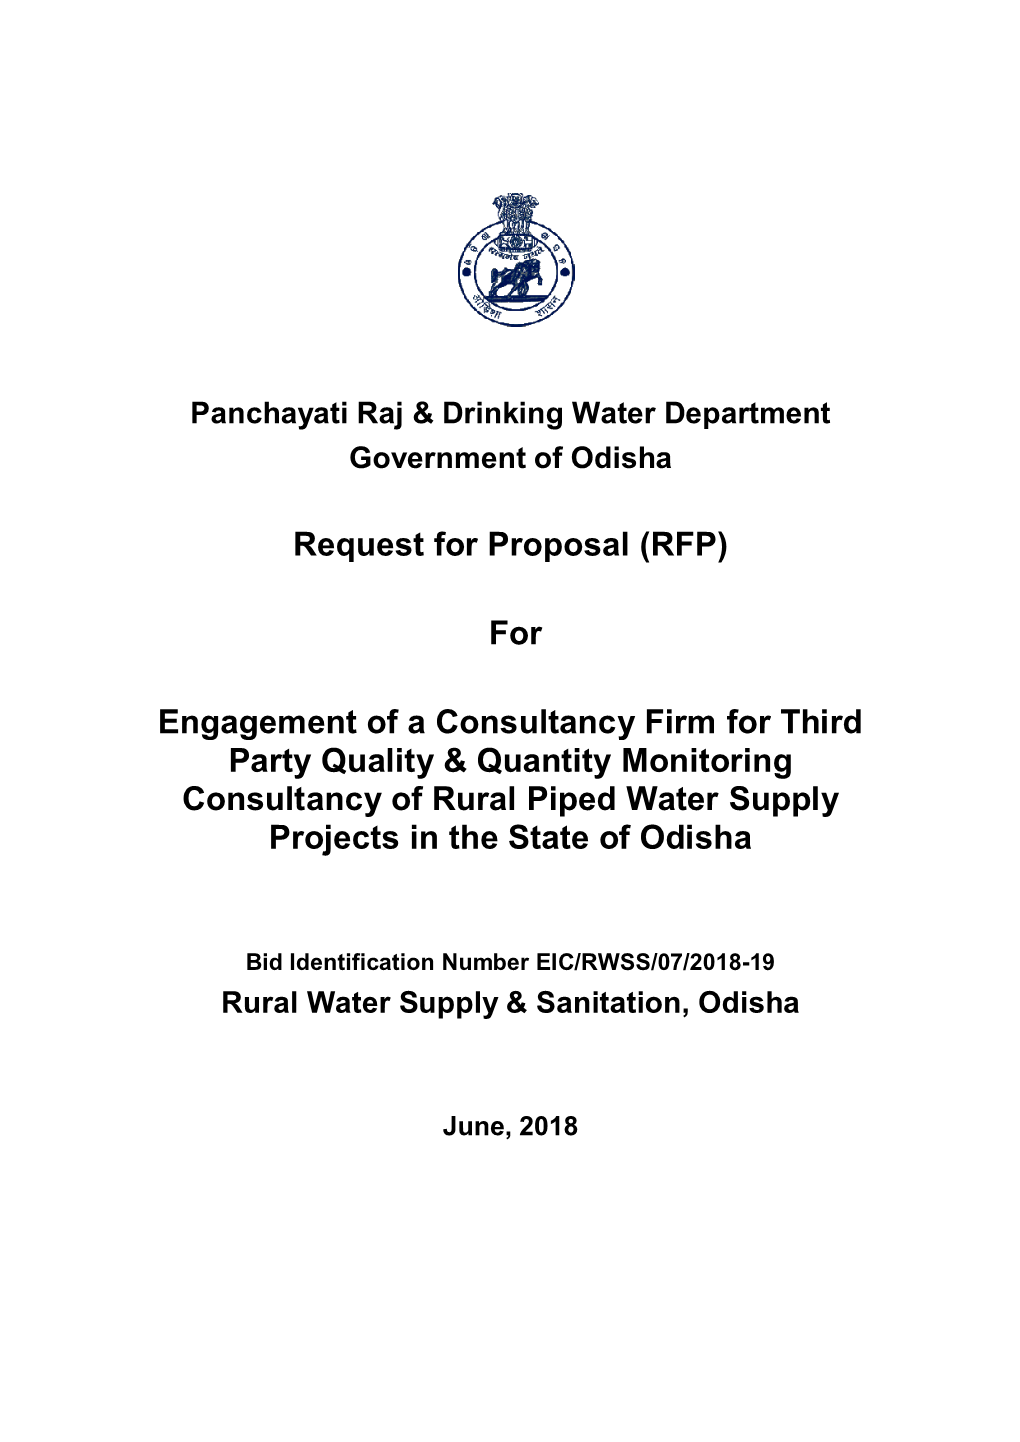 Request for Proposal (RFP) for Engagement of a Consultancy Firm